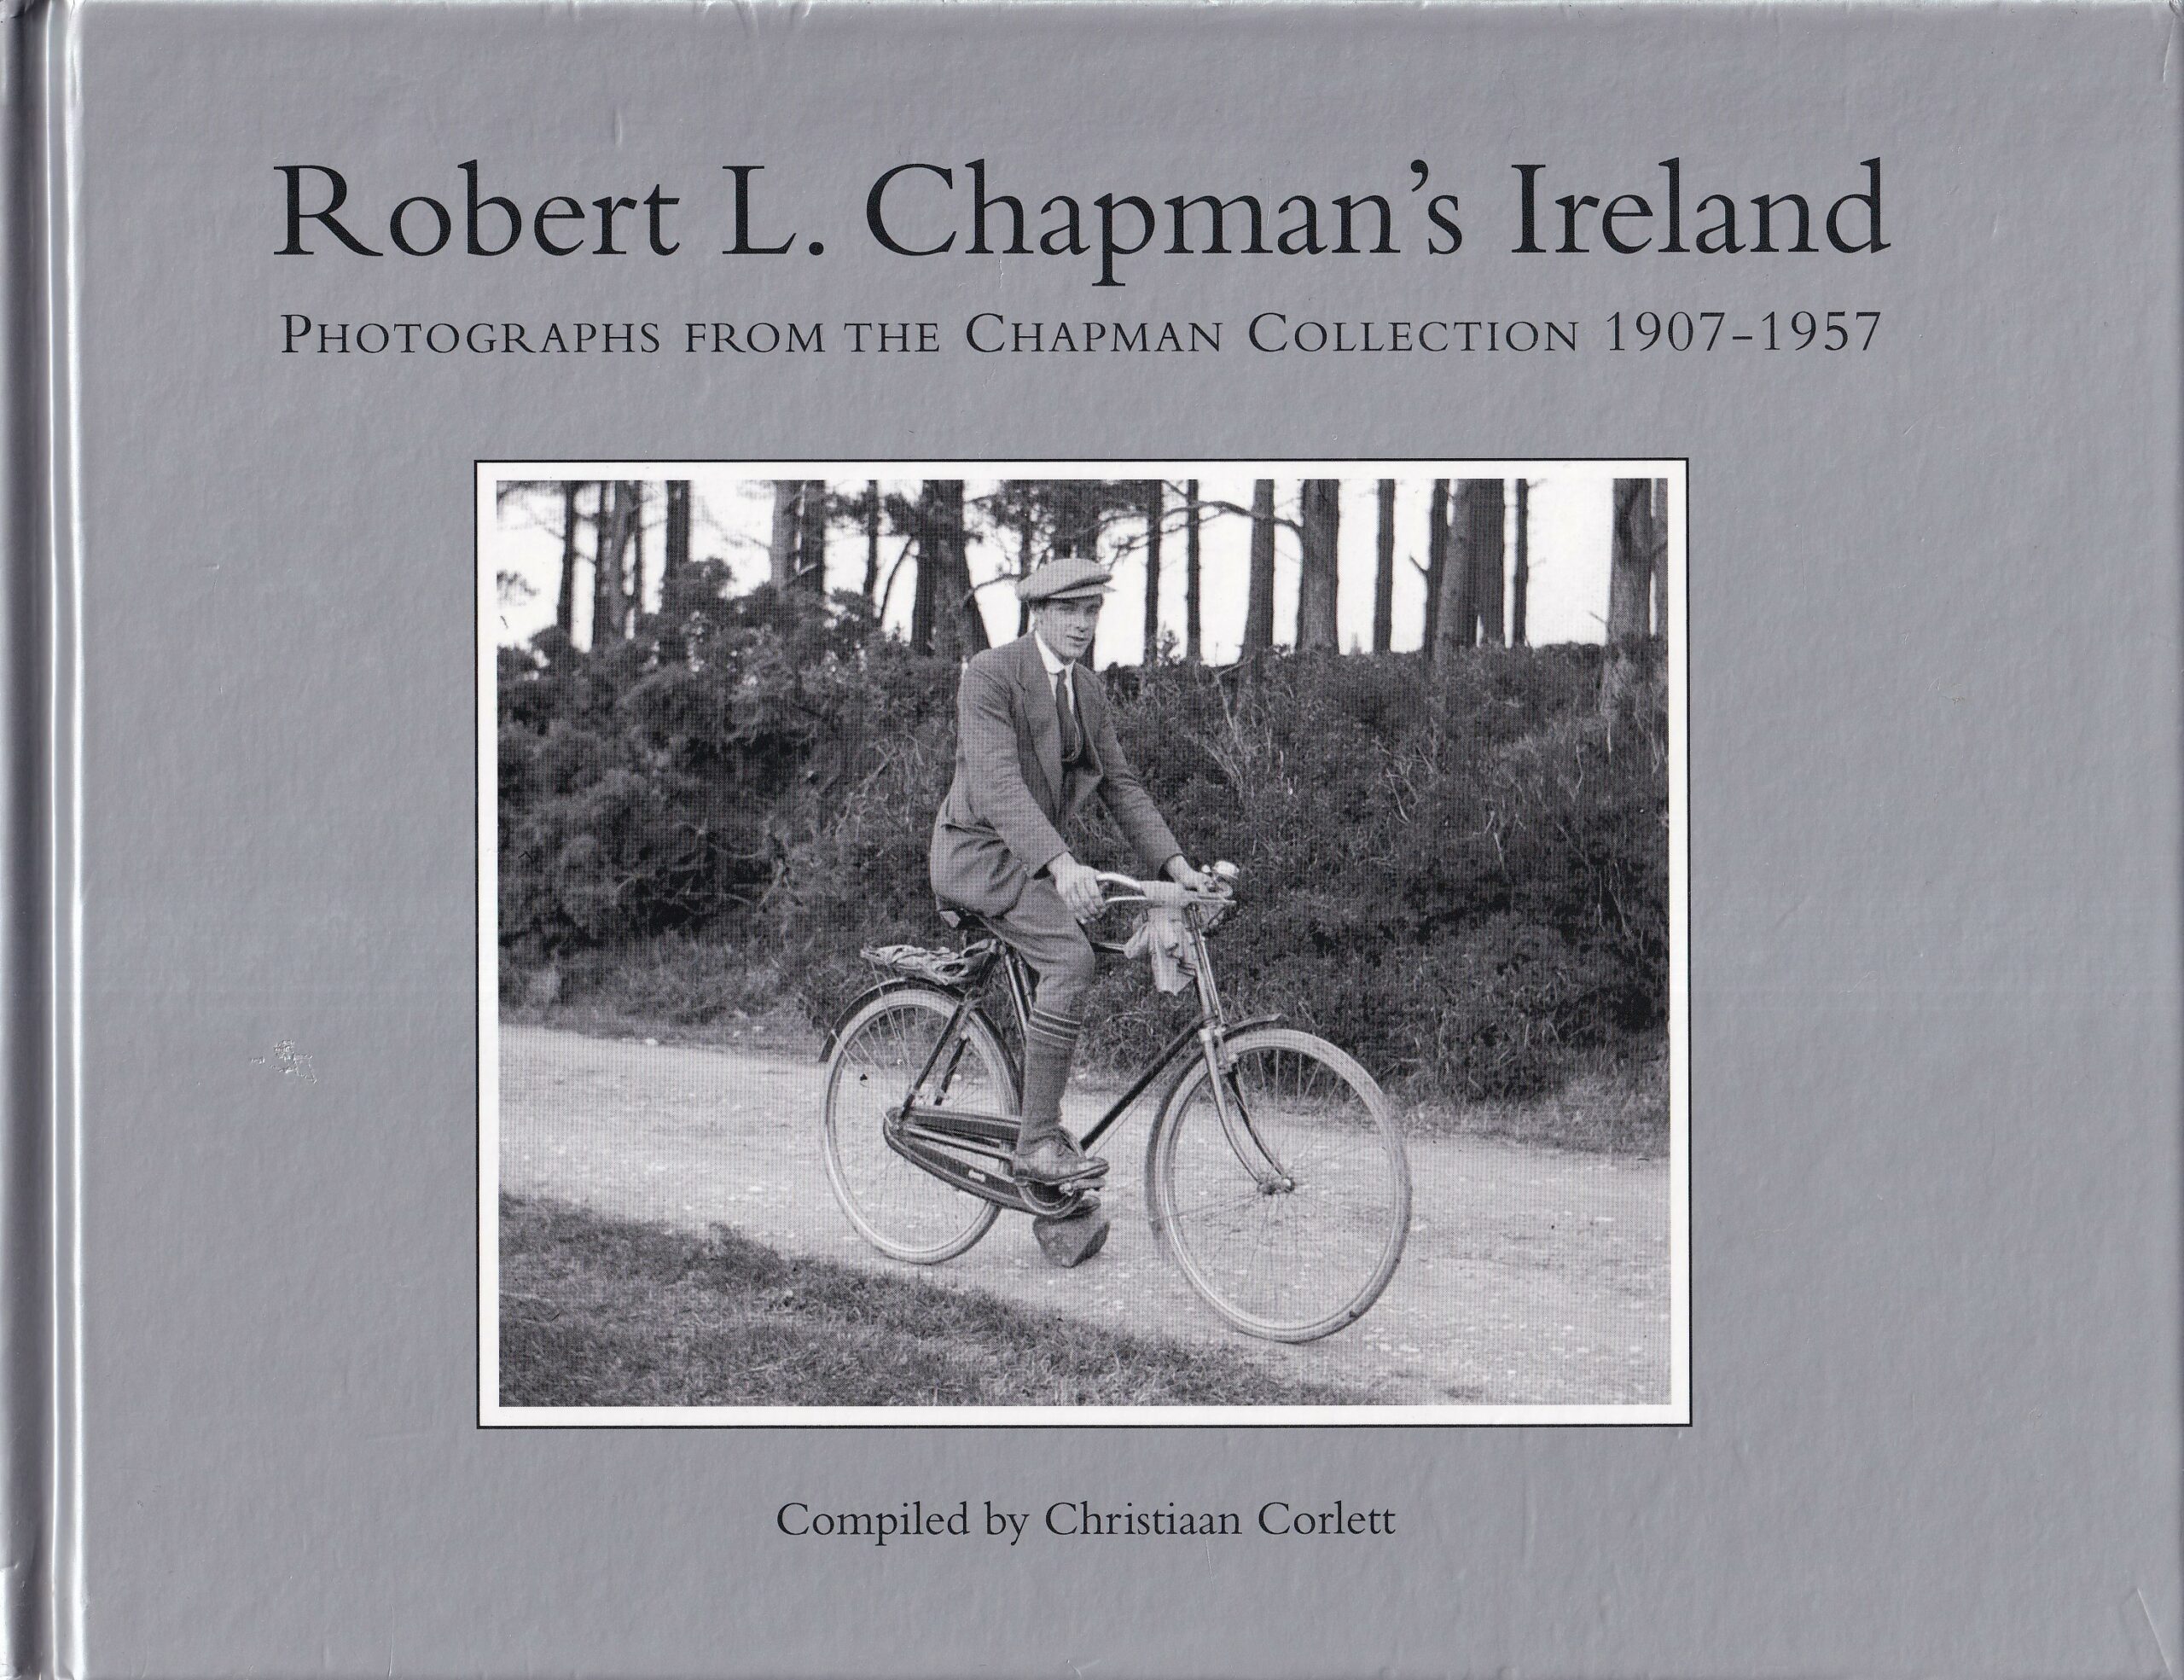 Robert L. Chapman’s Ireland: Photographs from the Chapman Collection 1907-1957- Signed by Christiaan Corlett (ed.)